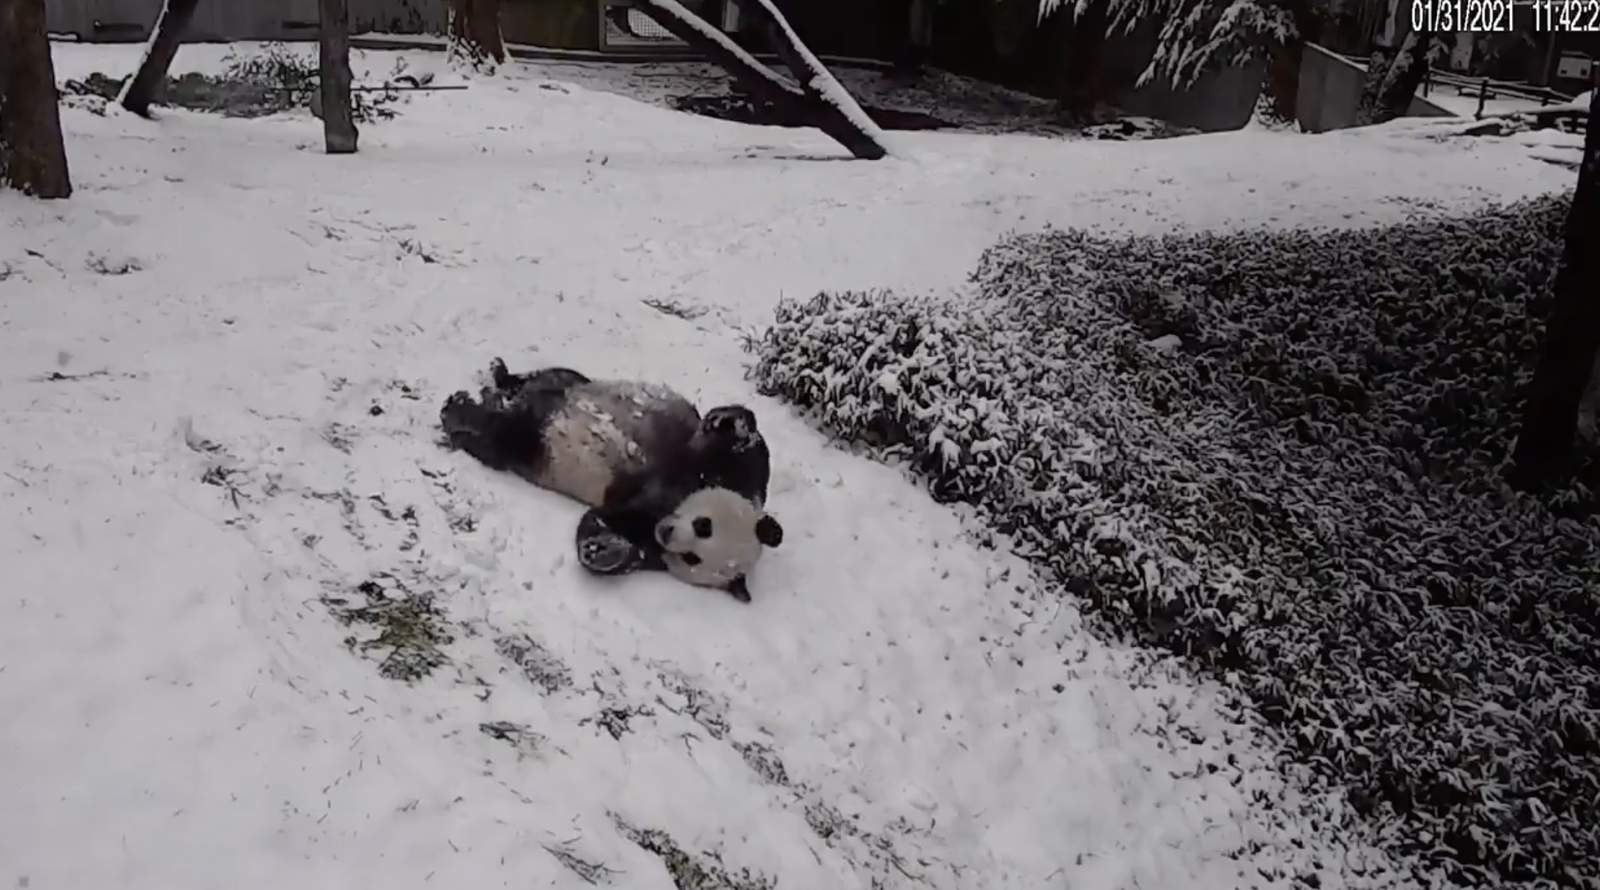 Video of pandas enjoying snow at National Zoo is what you need right now